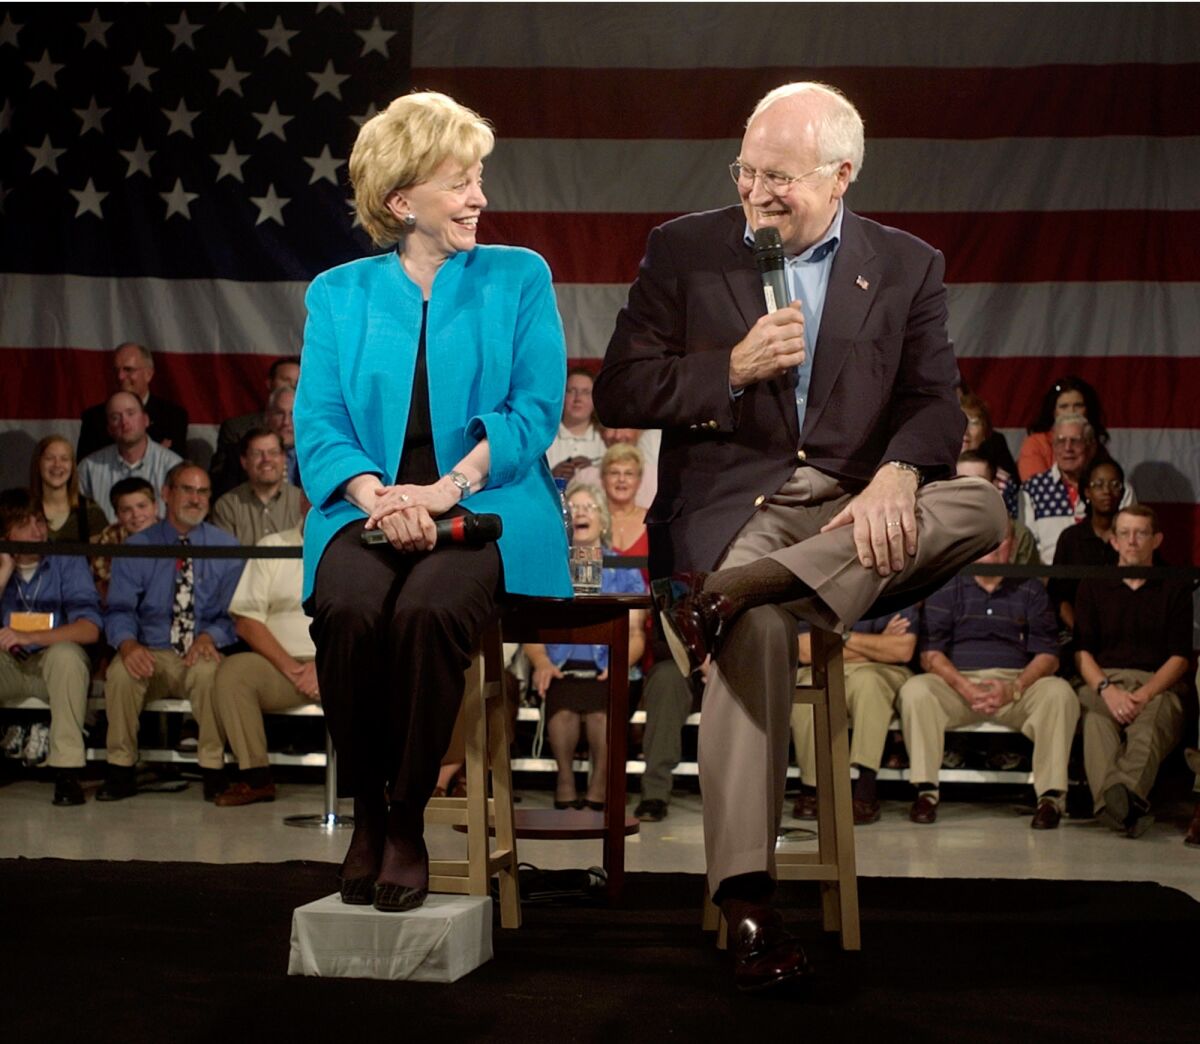 Lynne Cheney, left, with her husband the then-Vice President in 2004. Did she lead an ex-Harvard president astray with a 1991 speech?